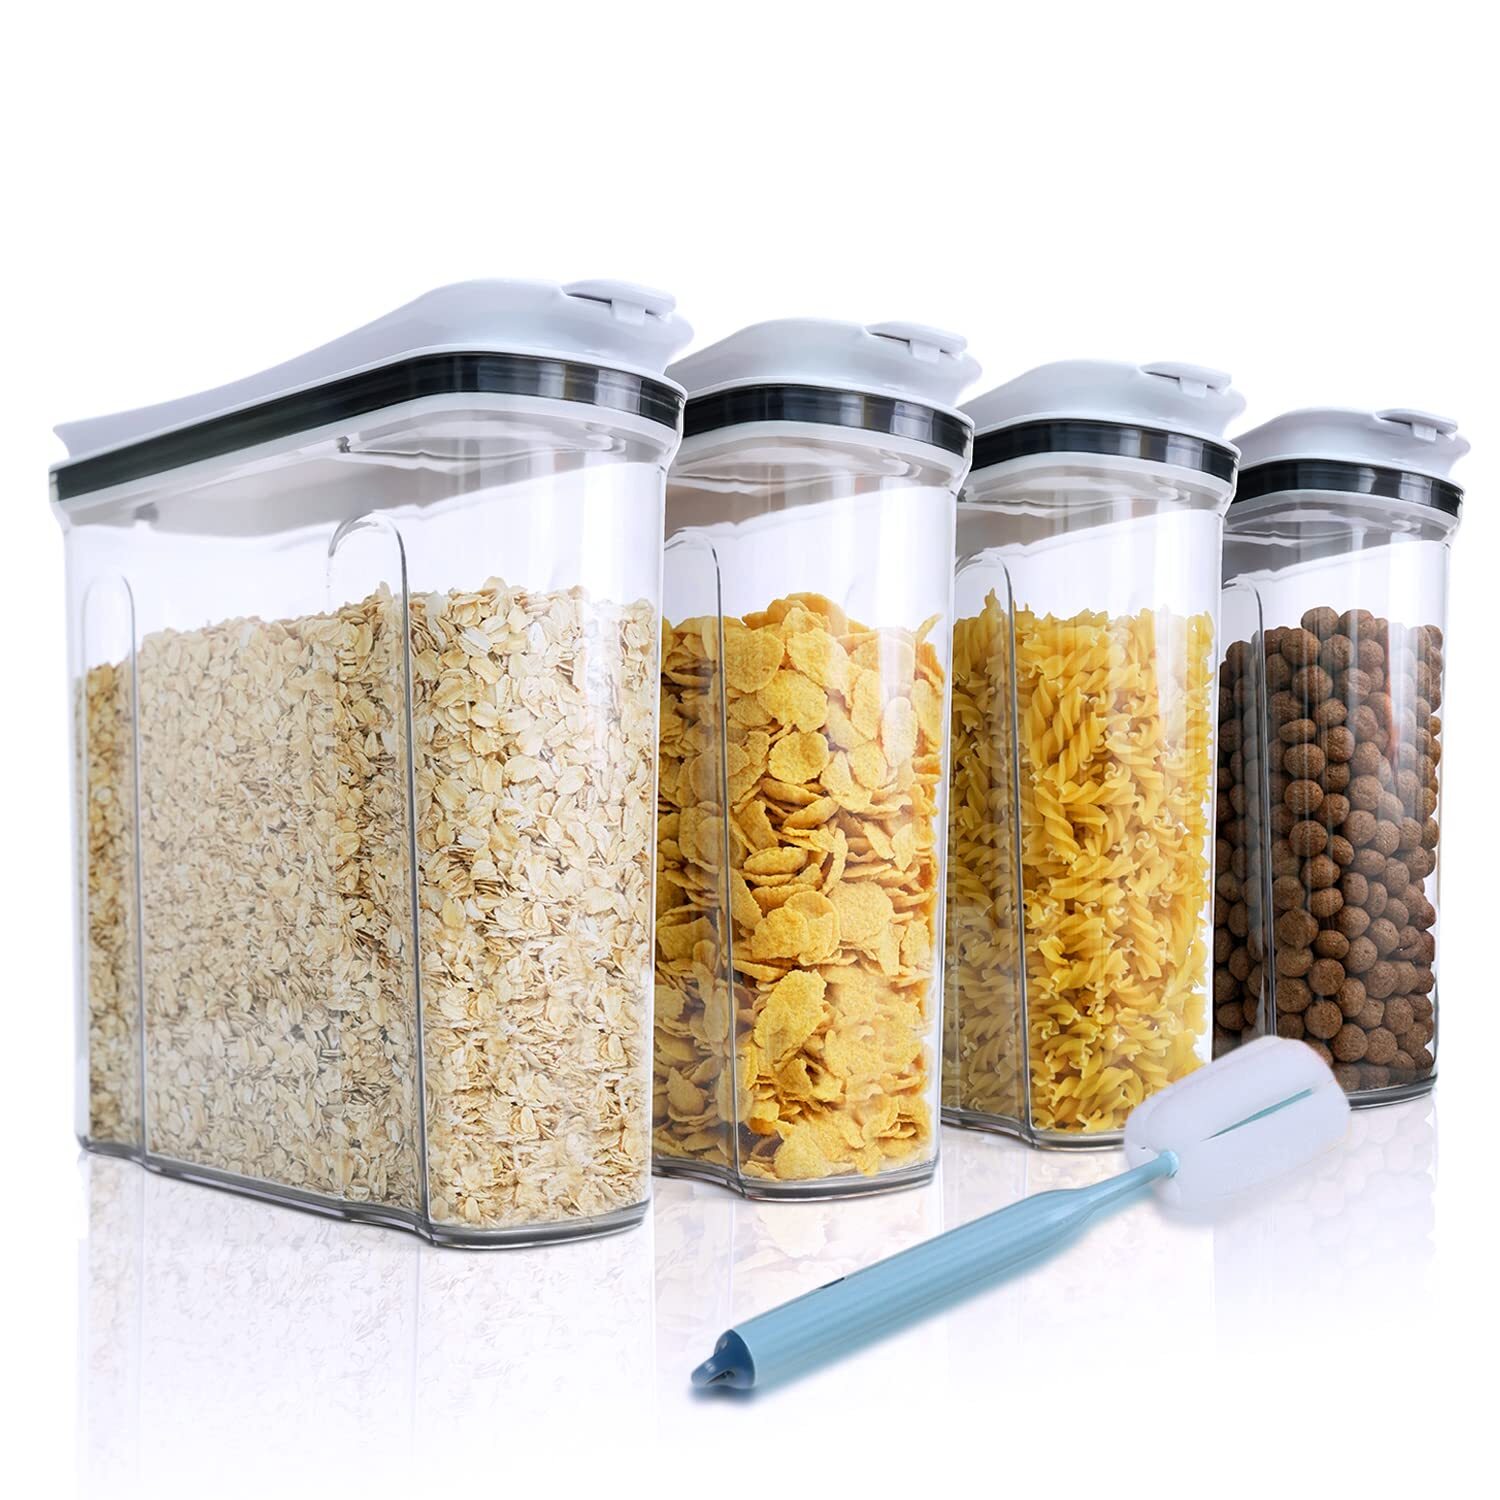 Cereal Containers Storage Set, Airtight Food Storage Container with Lid 4L/135.2oz,4PCS BPA-FREE Plastic Pantry Organization Canisters for Rice Cereal Flour Sugar Dry Food in Kitchen